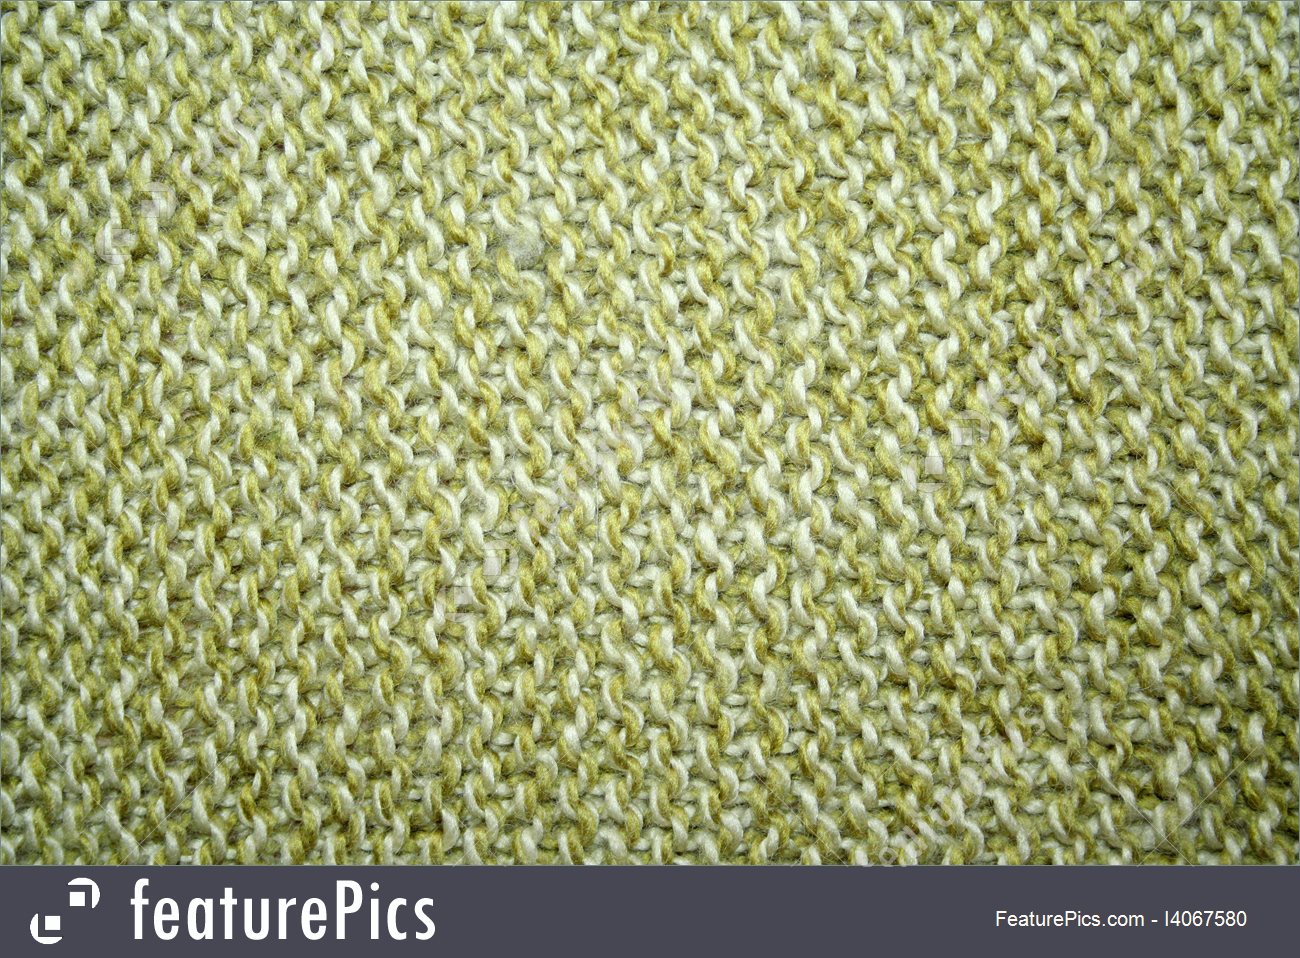 Knitted Wool As Background